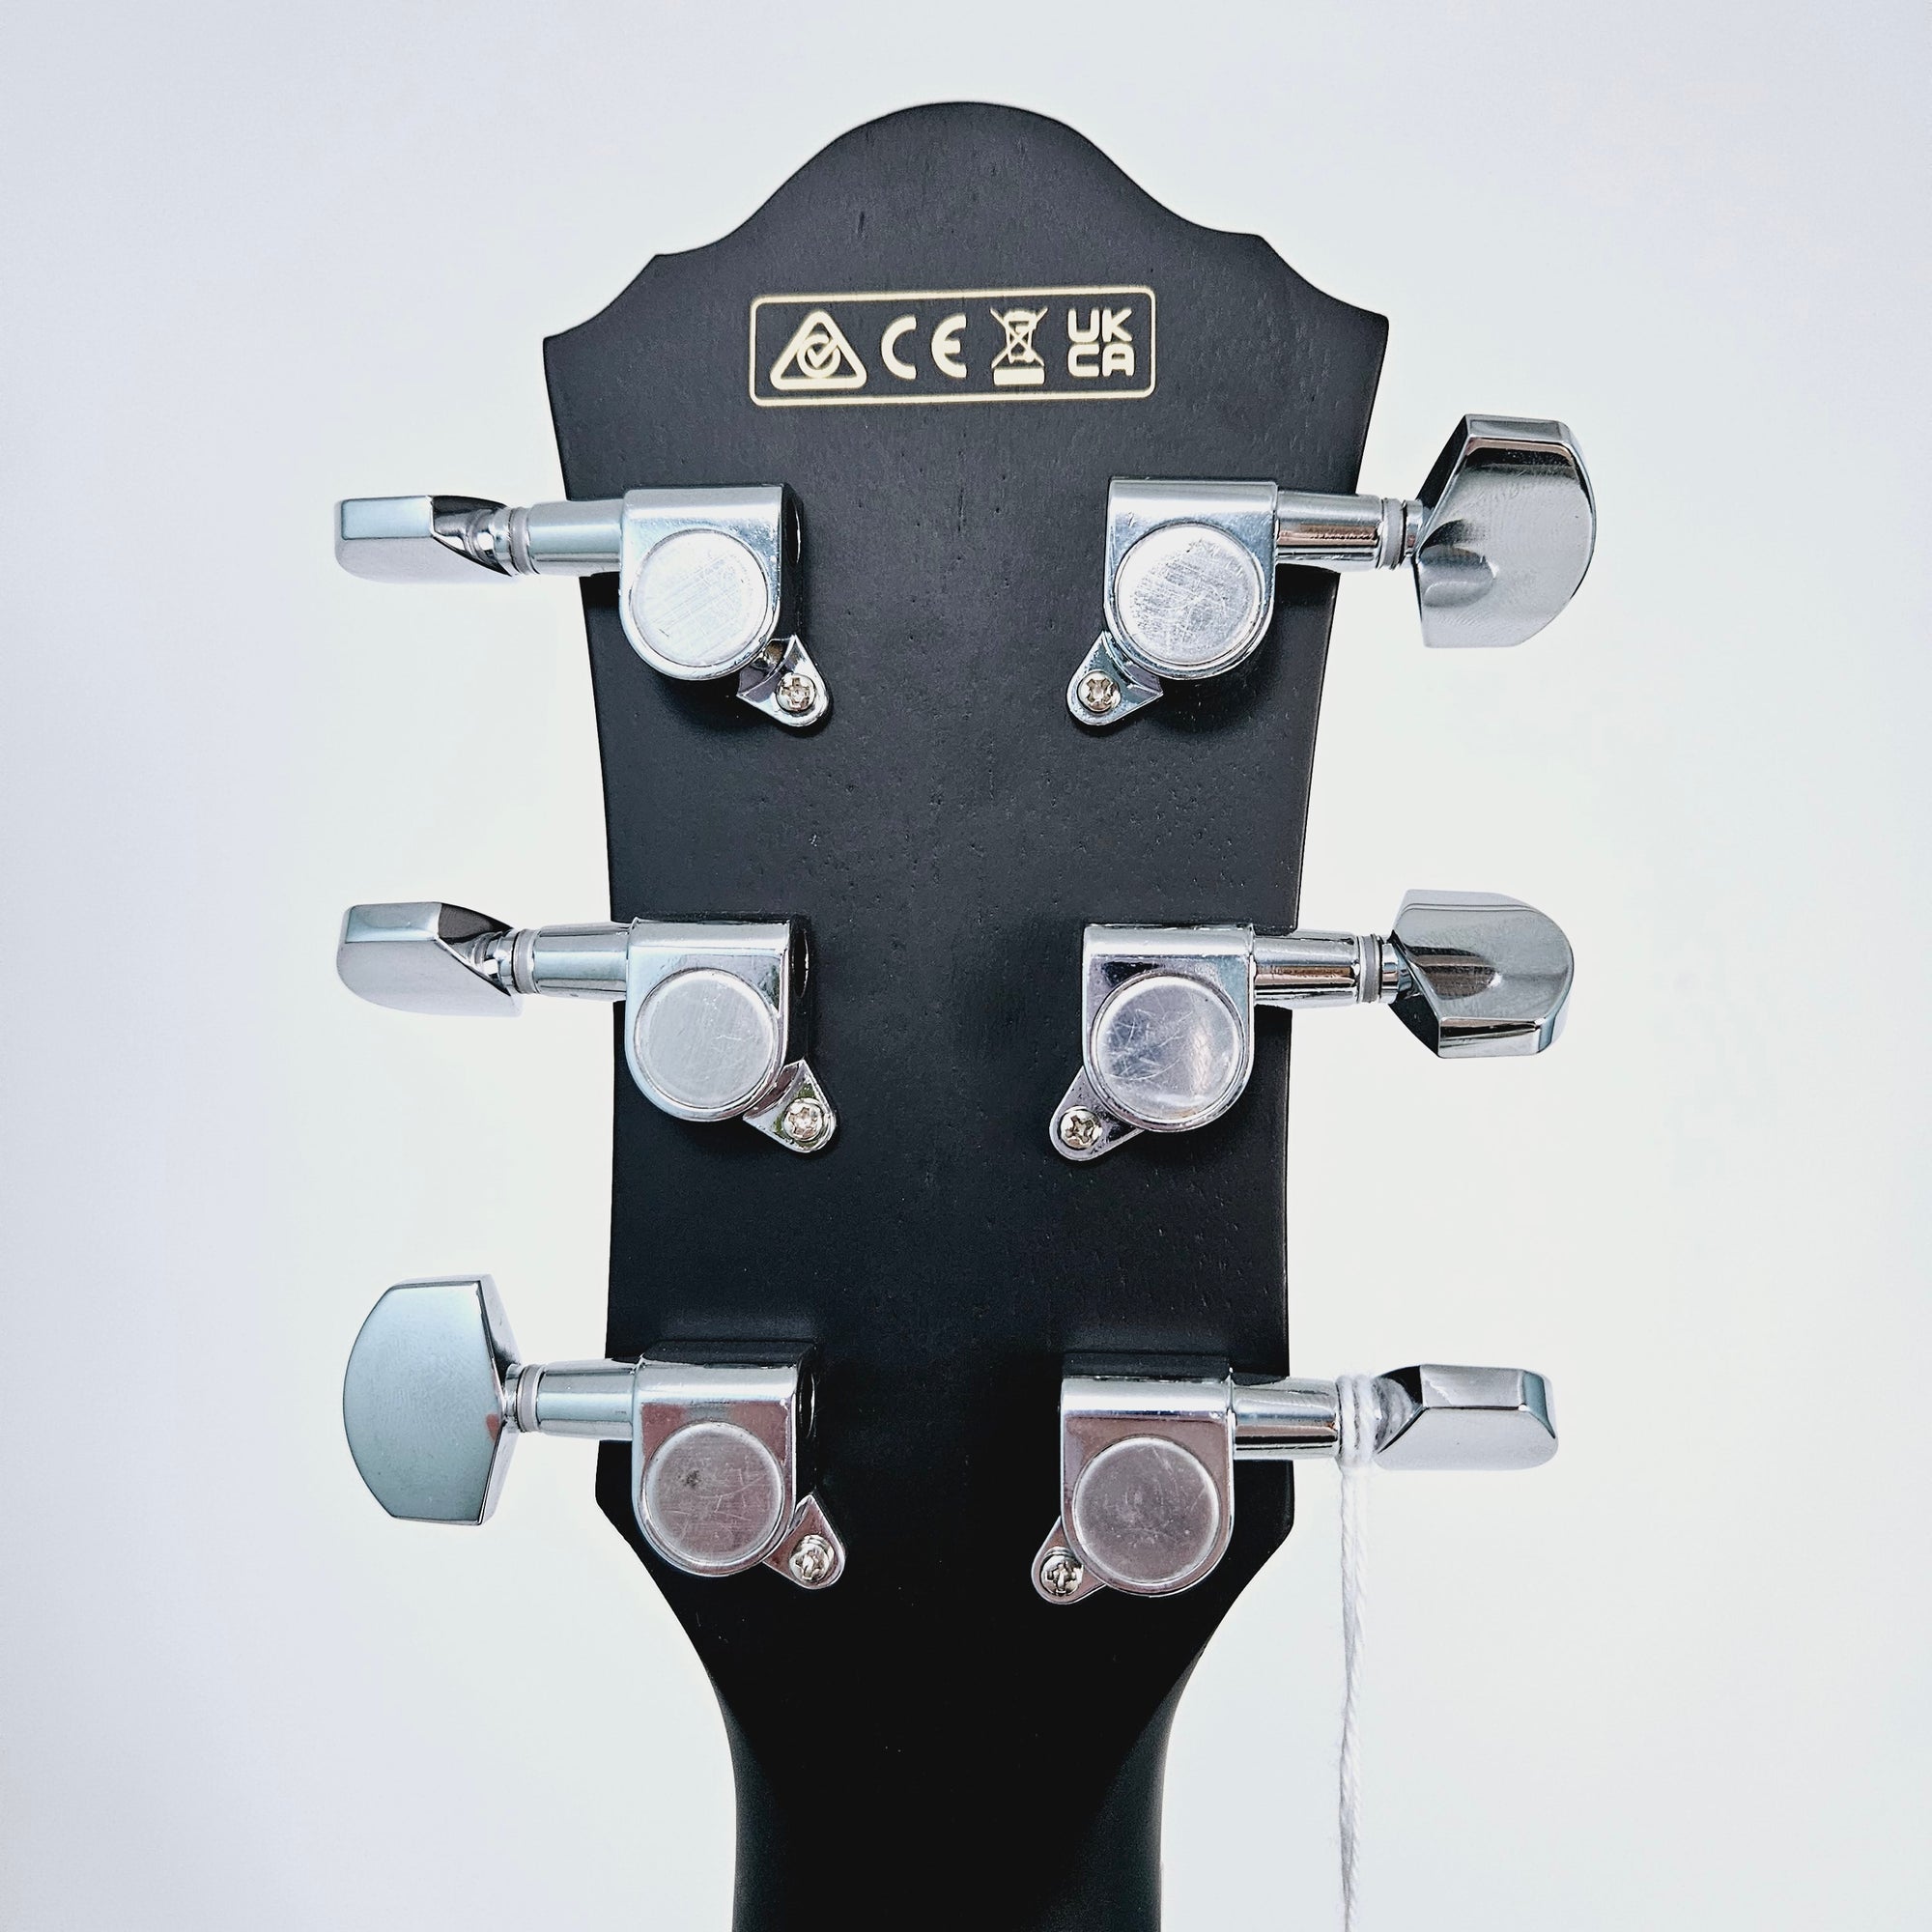 Ibanez Acoustic Electric Guitar - Weathered Black AEG7MHWK Back of Headstock View